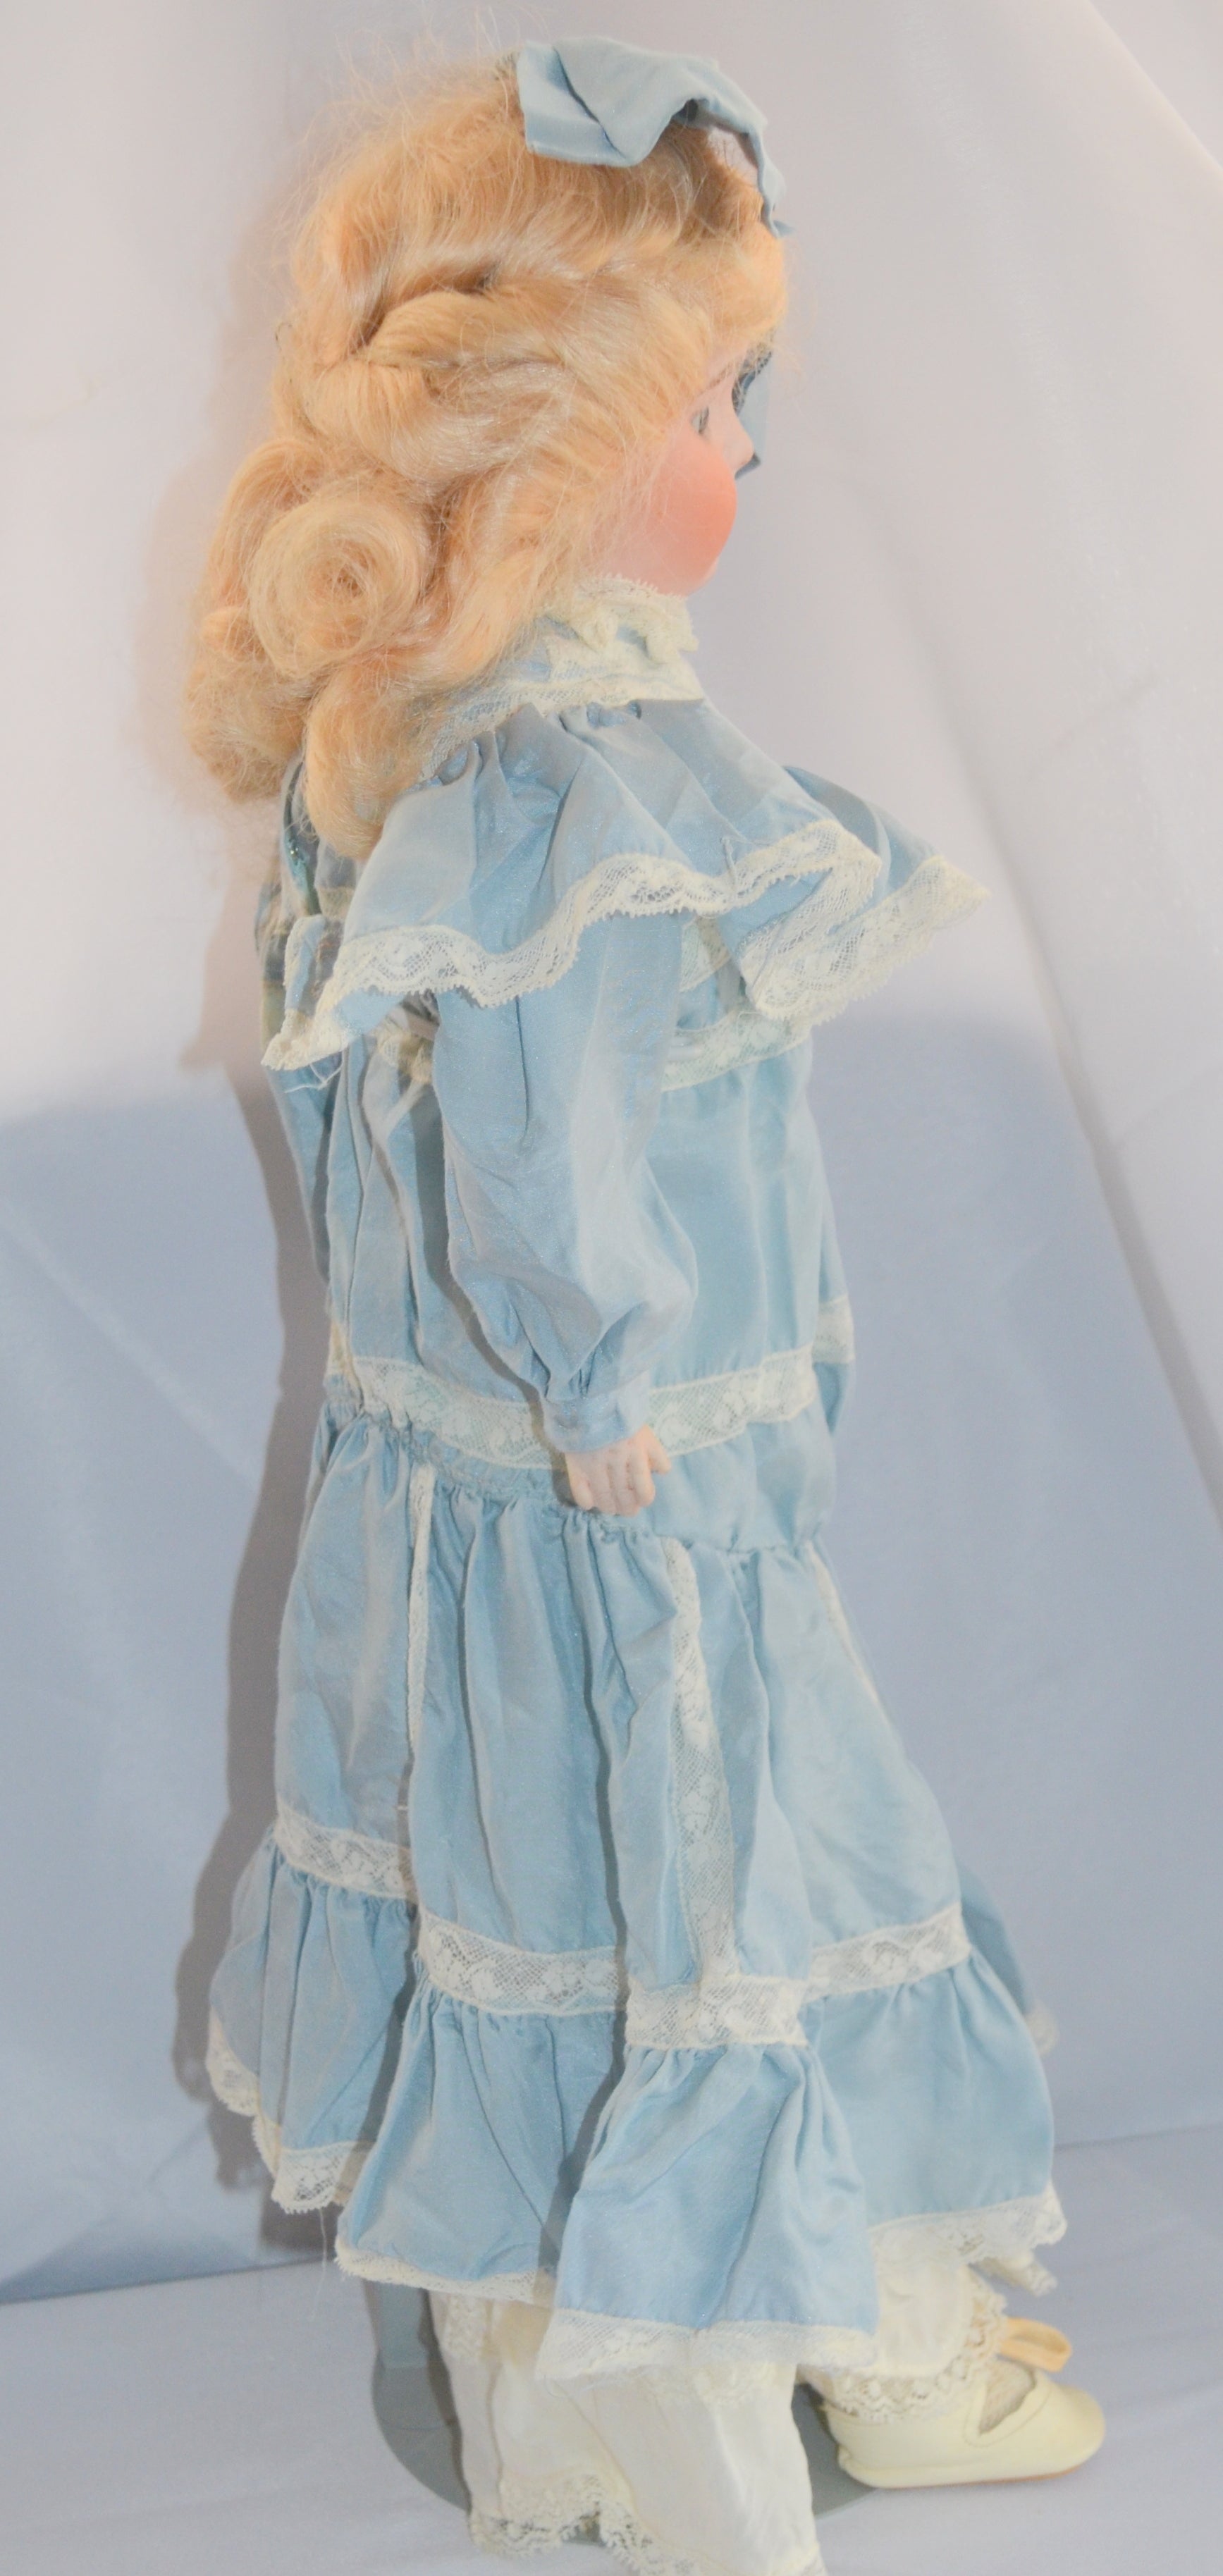 German Bisque Doll Antique Porcelain Mohair Wig Sleep Eyes Marked Spec -  ChristiesCurios